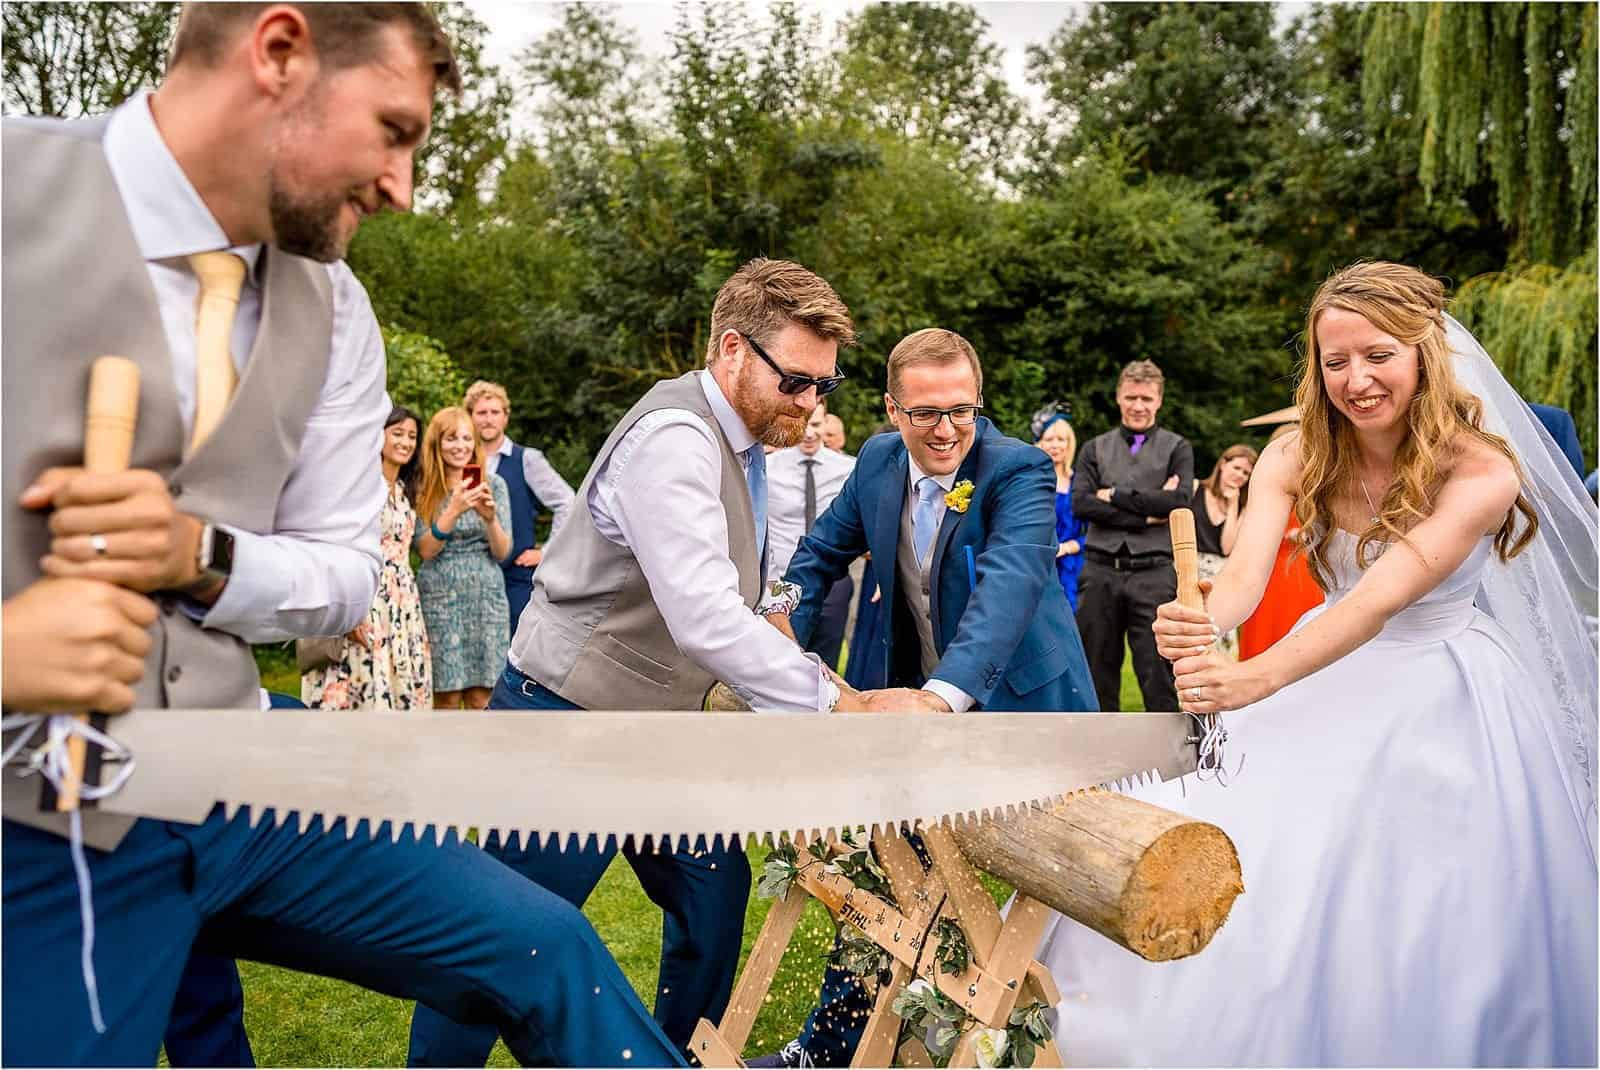 bride and groom sawing a log as a german tradition - best wedding photography in warwickshire 2019